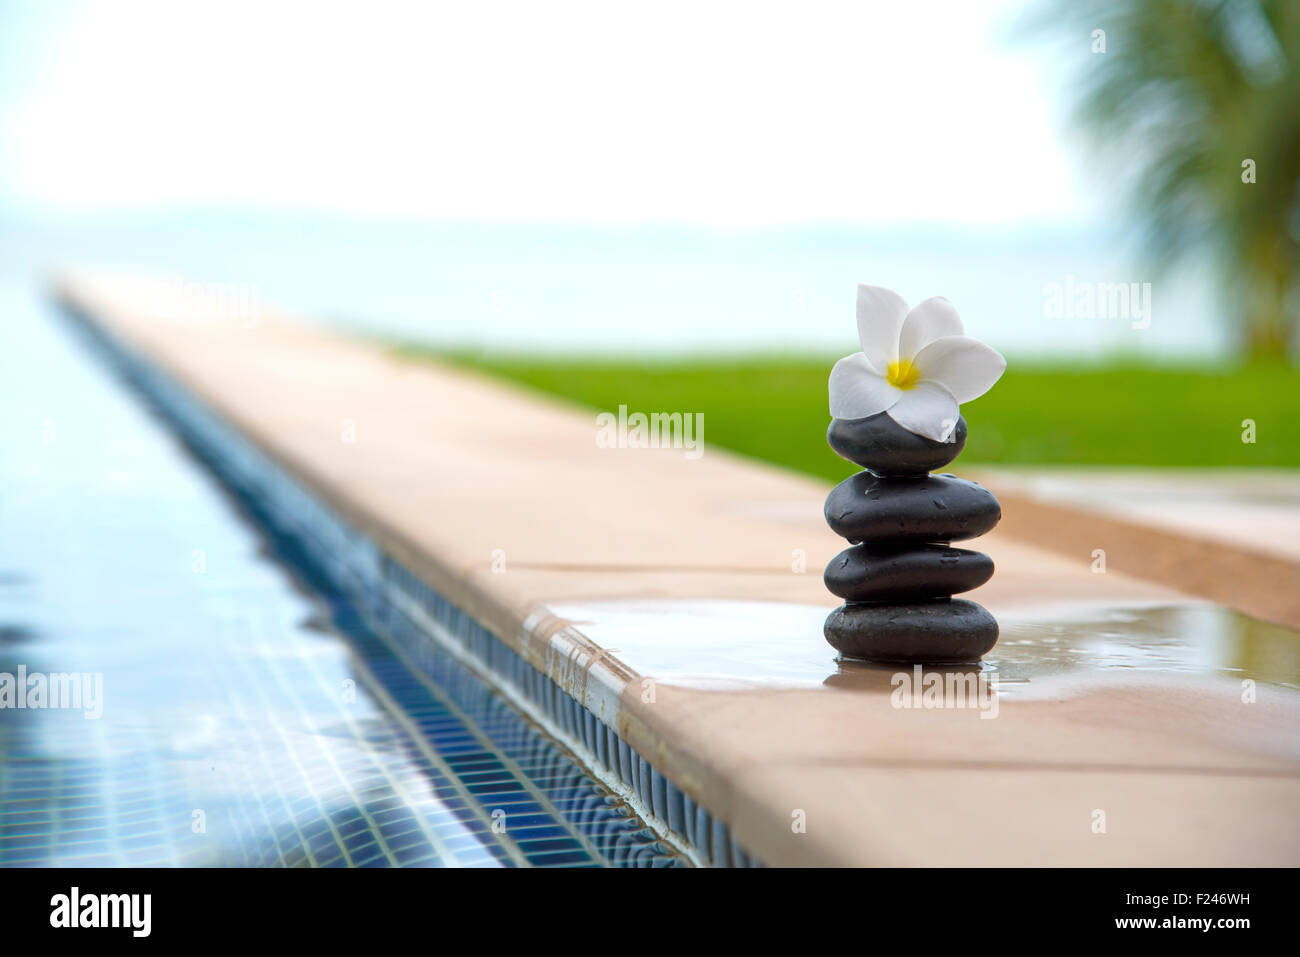 Tranquility scene of peaceful life at spa resort Stock Photo